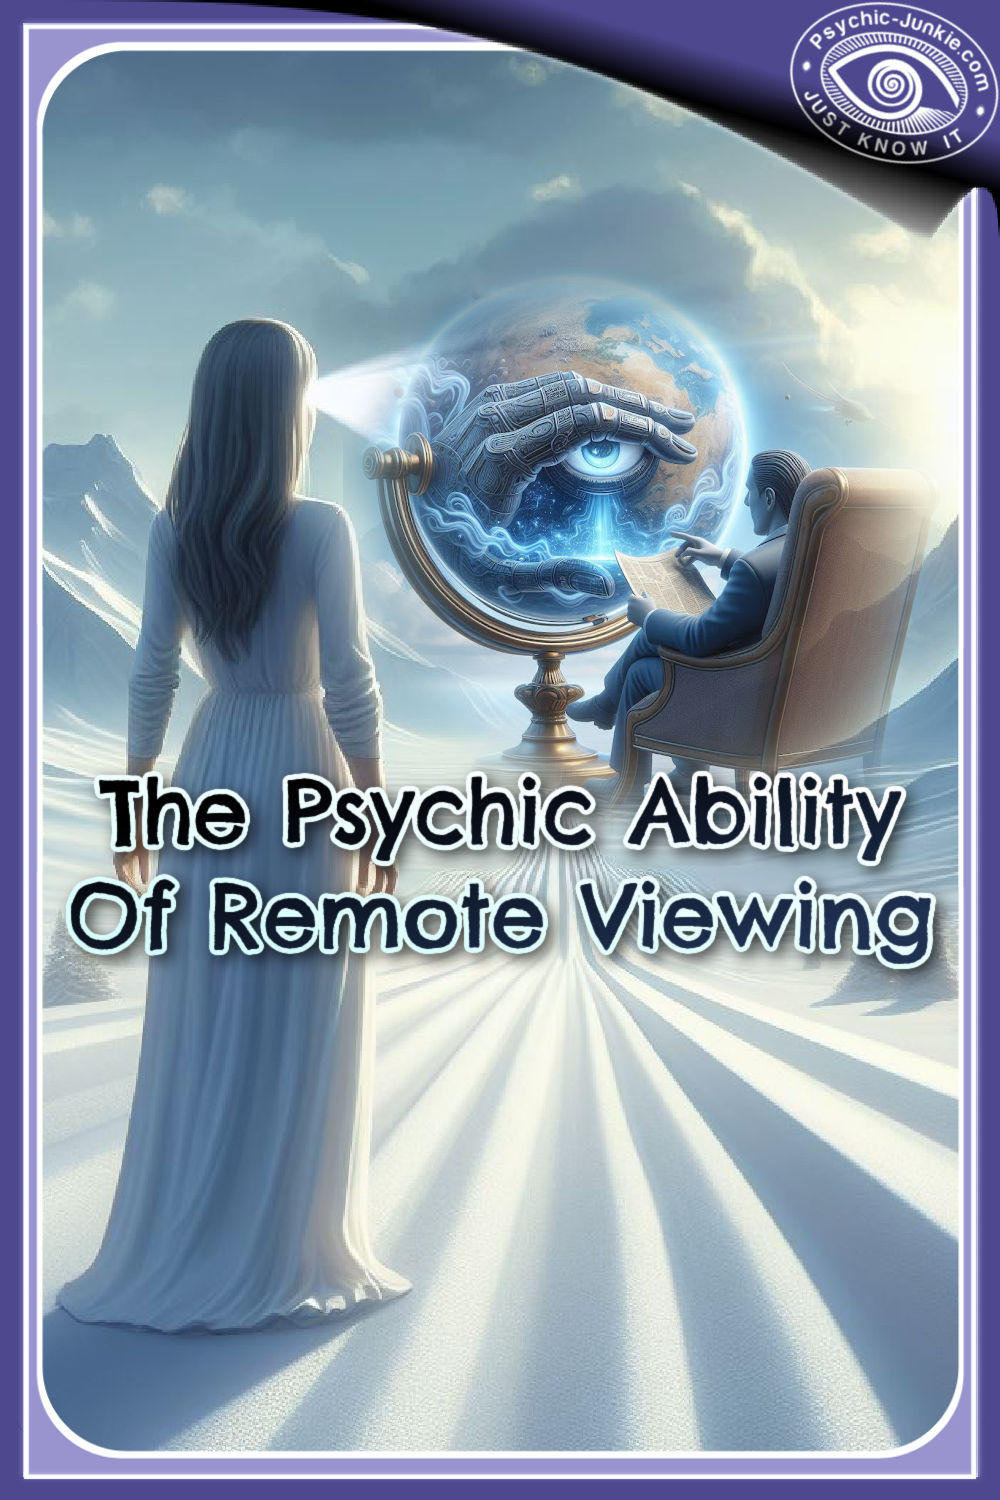 The Psychic Ability Of Remote Viewing